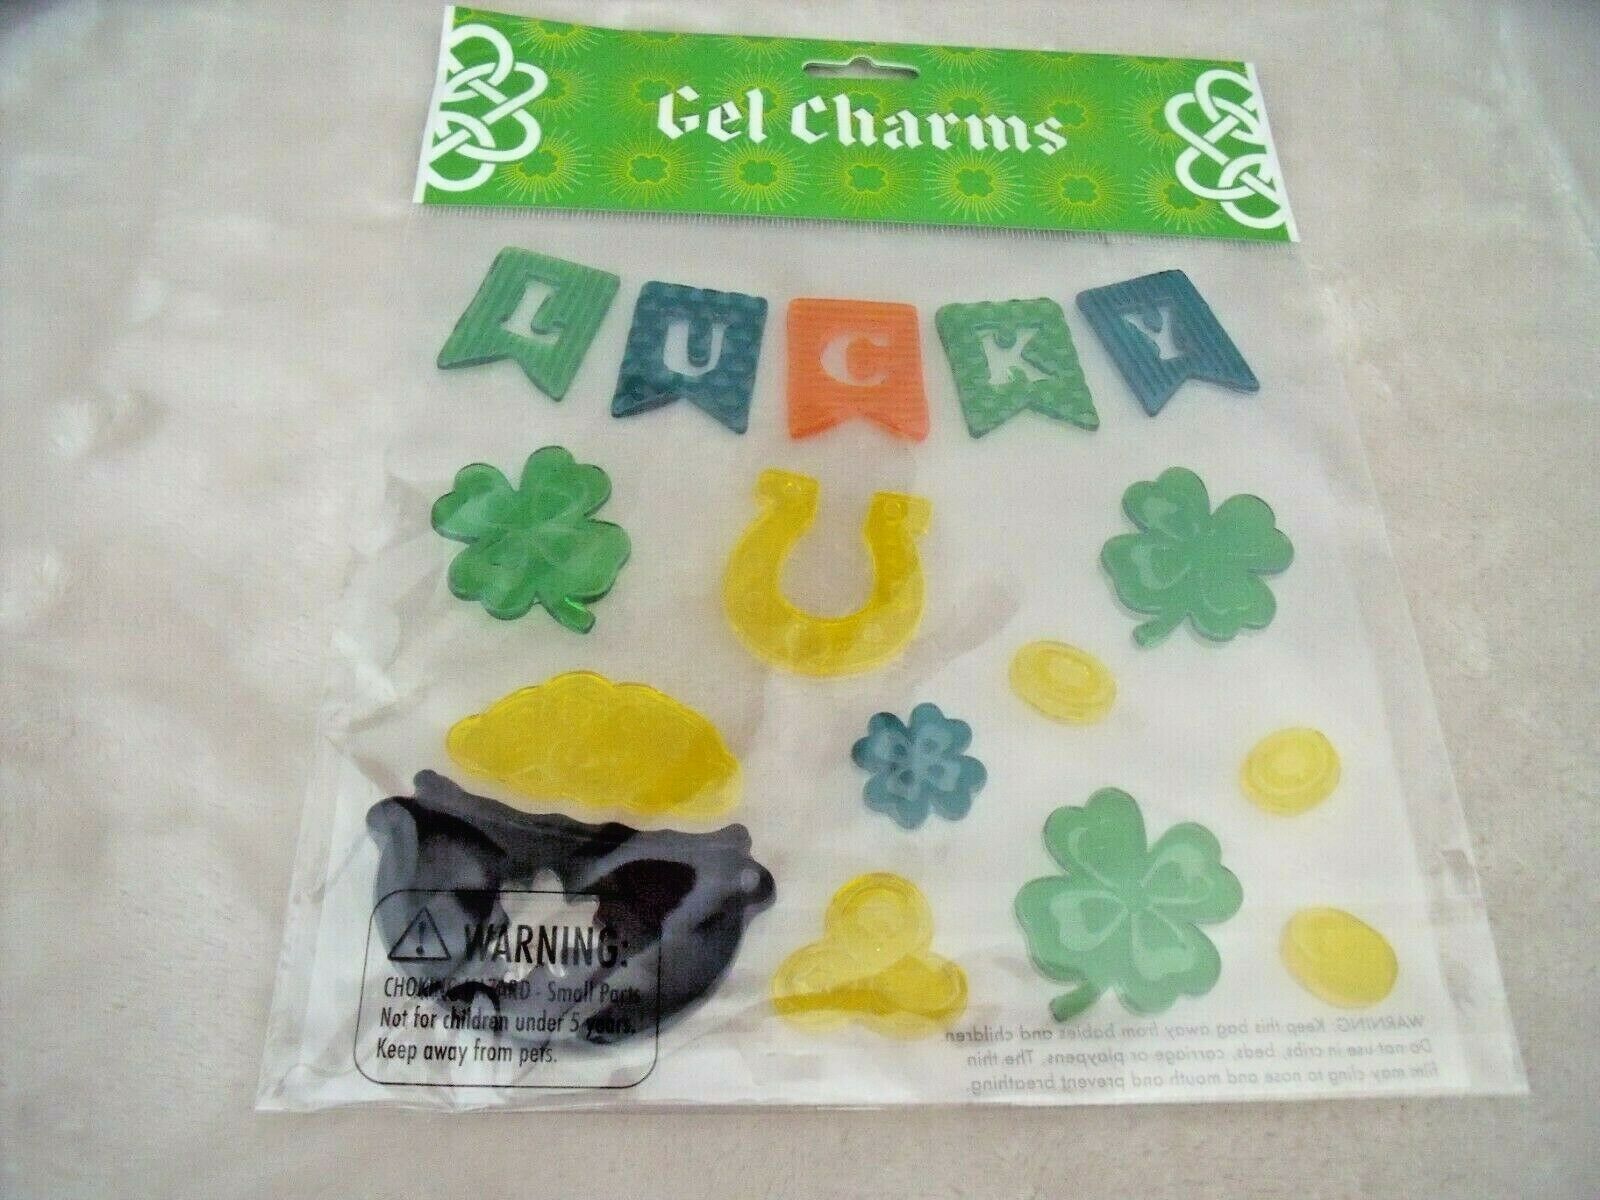 Primary image for NEW St Patricks Day GEL CHARMS Window Clings Decals SHAMROCKS Pot Of Gold LUCKY